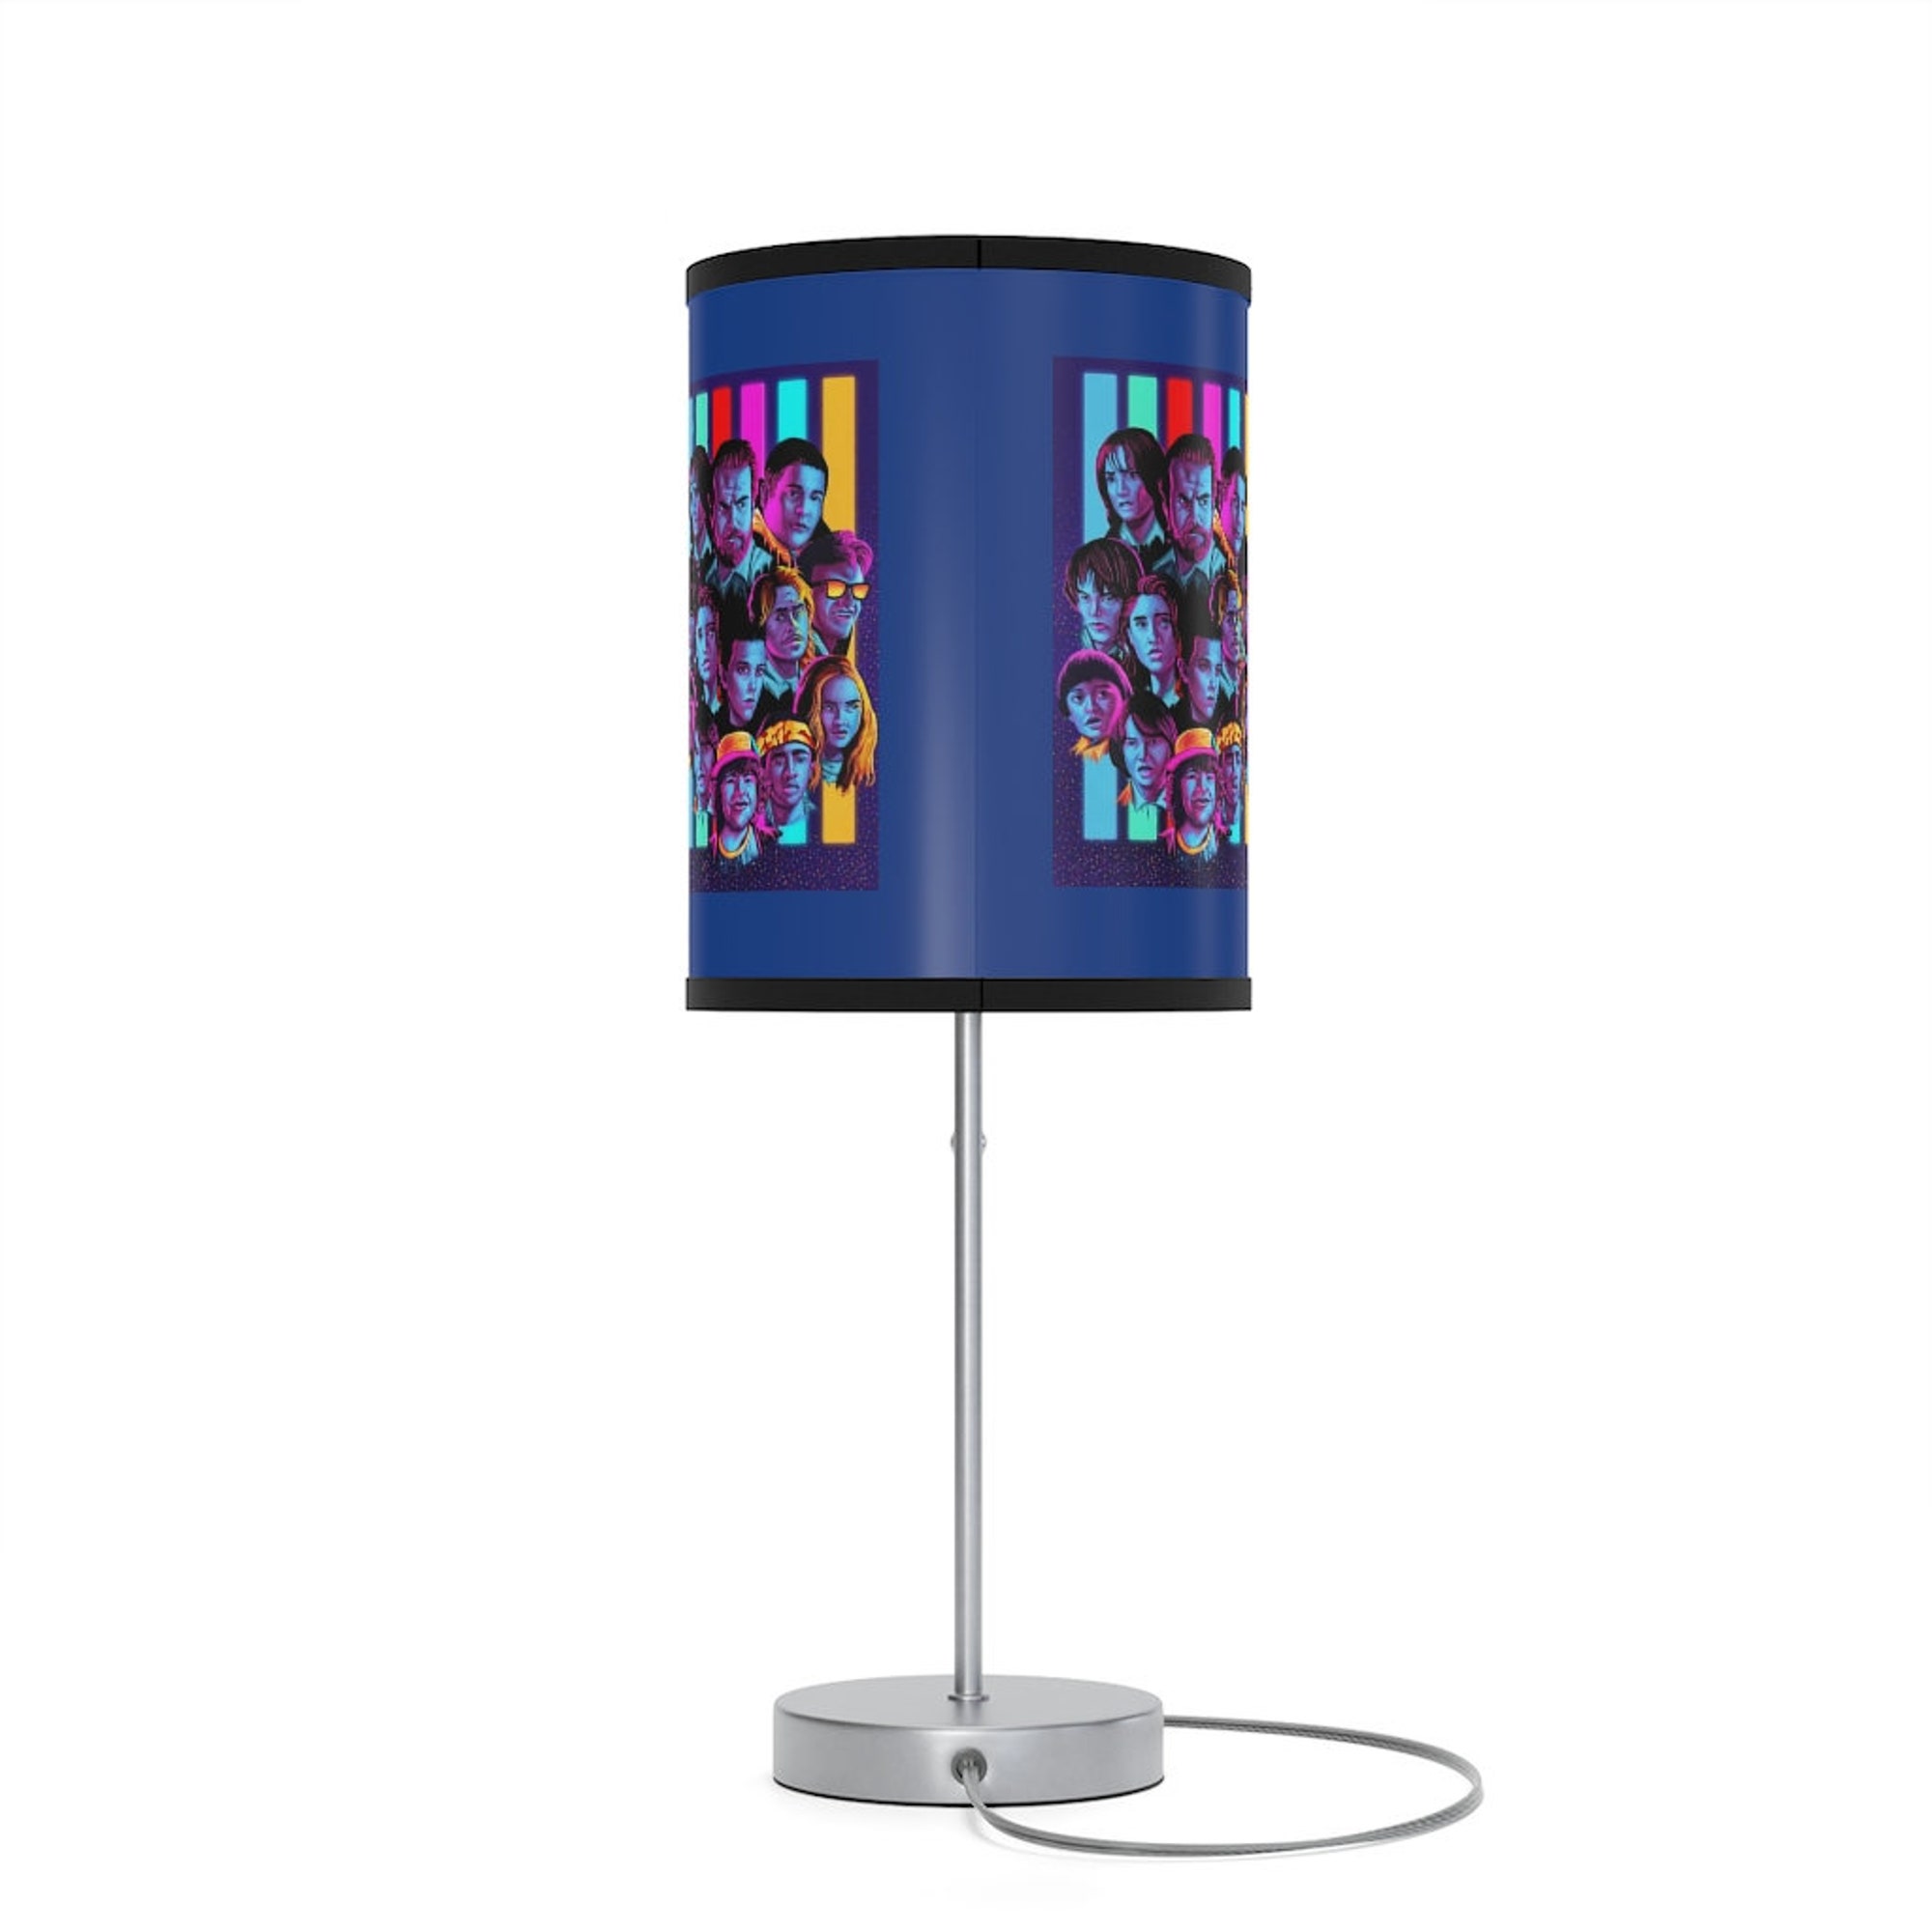 STRANGER THINGS - Lamp on Stand, All Cast, Poster Painted Style Art, Desk Lamp